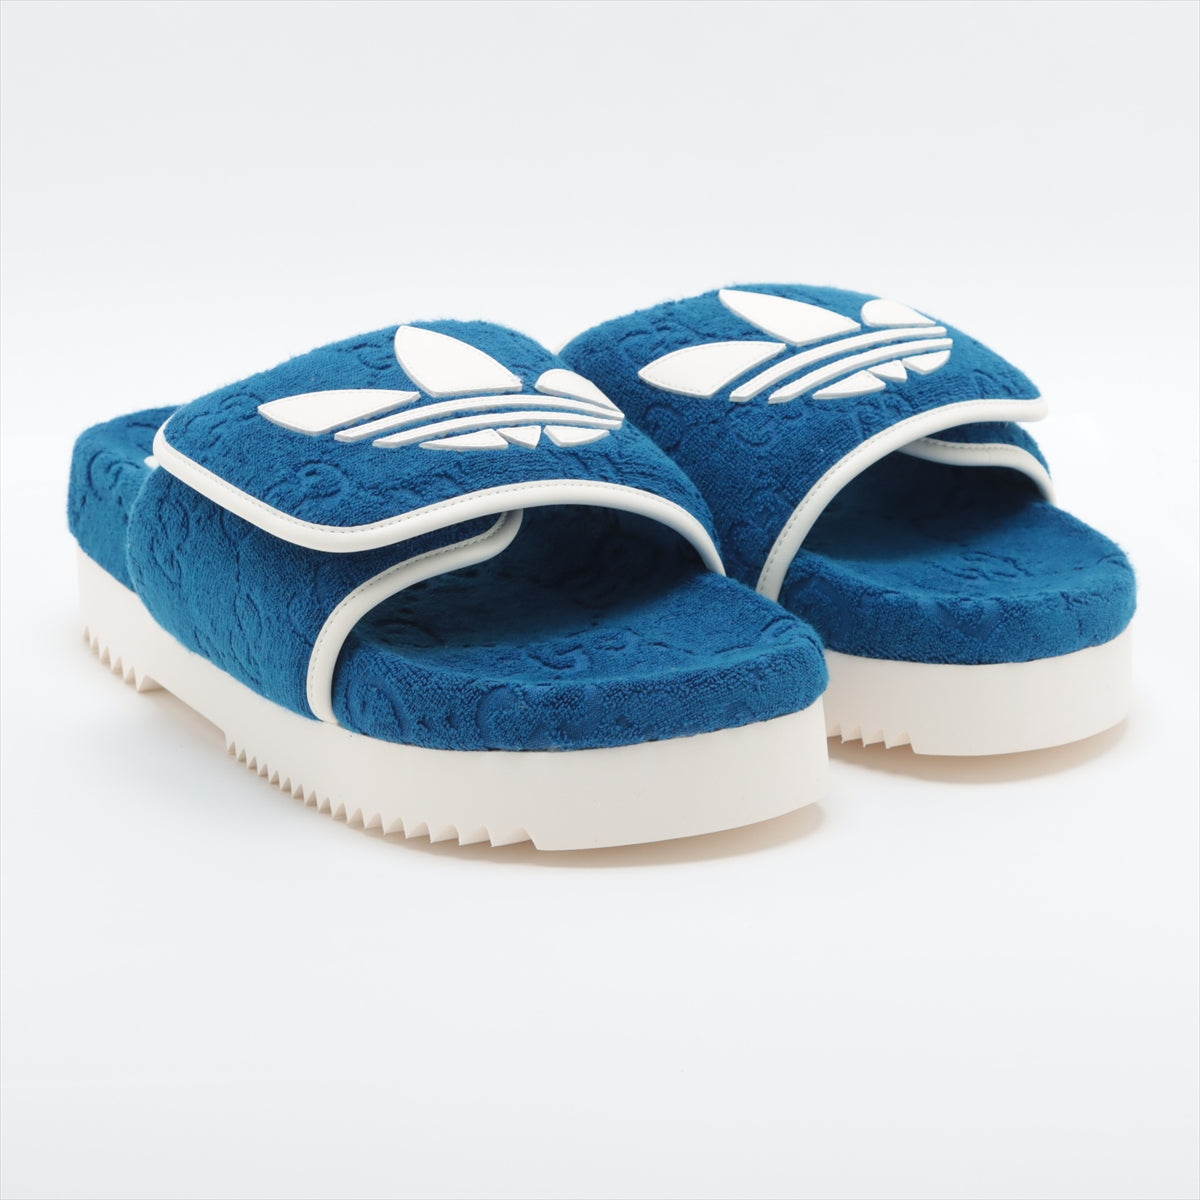 Gucci x Adidas GG Supreme Cotton & Peather Sandals 9 Men's Blue x white Box There is a storage bag